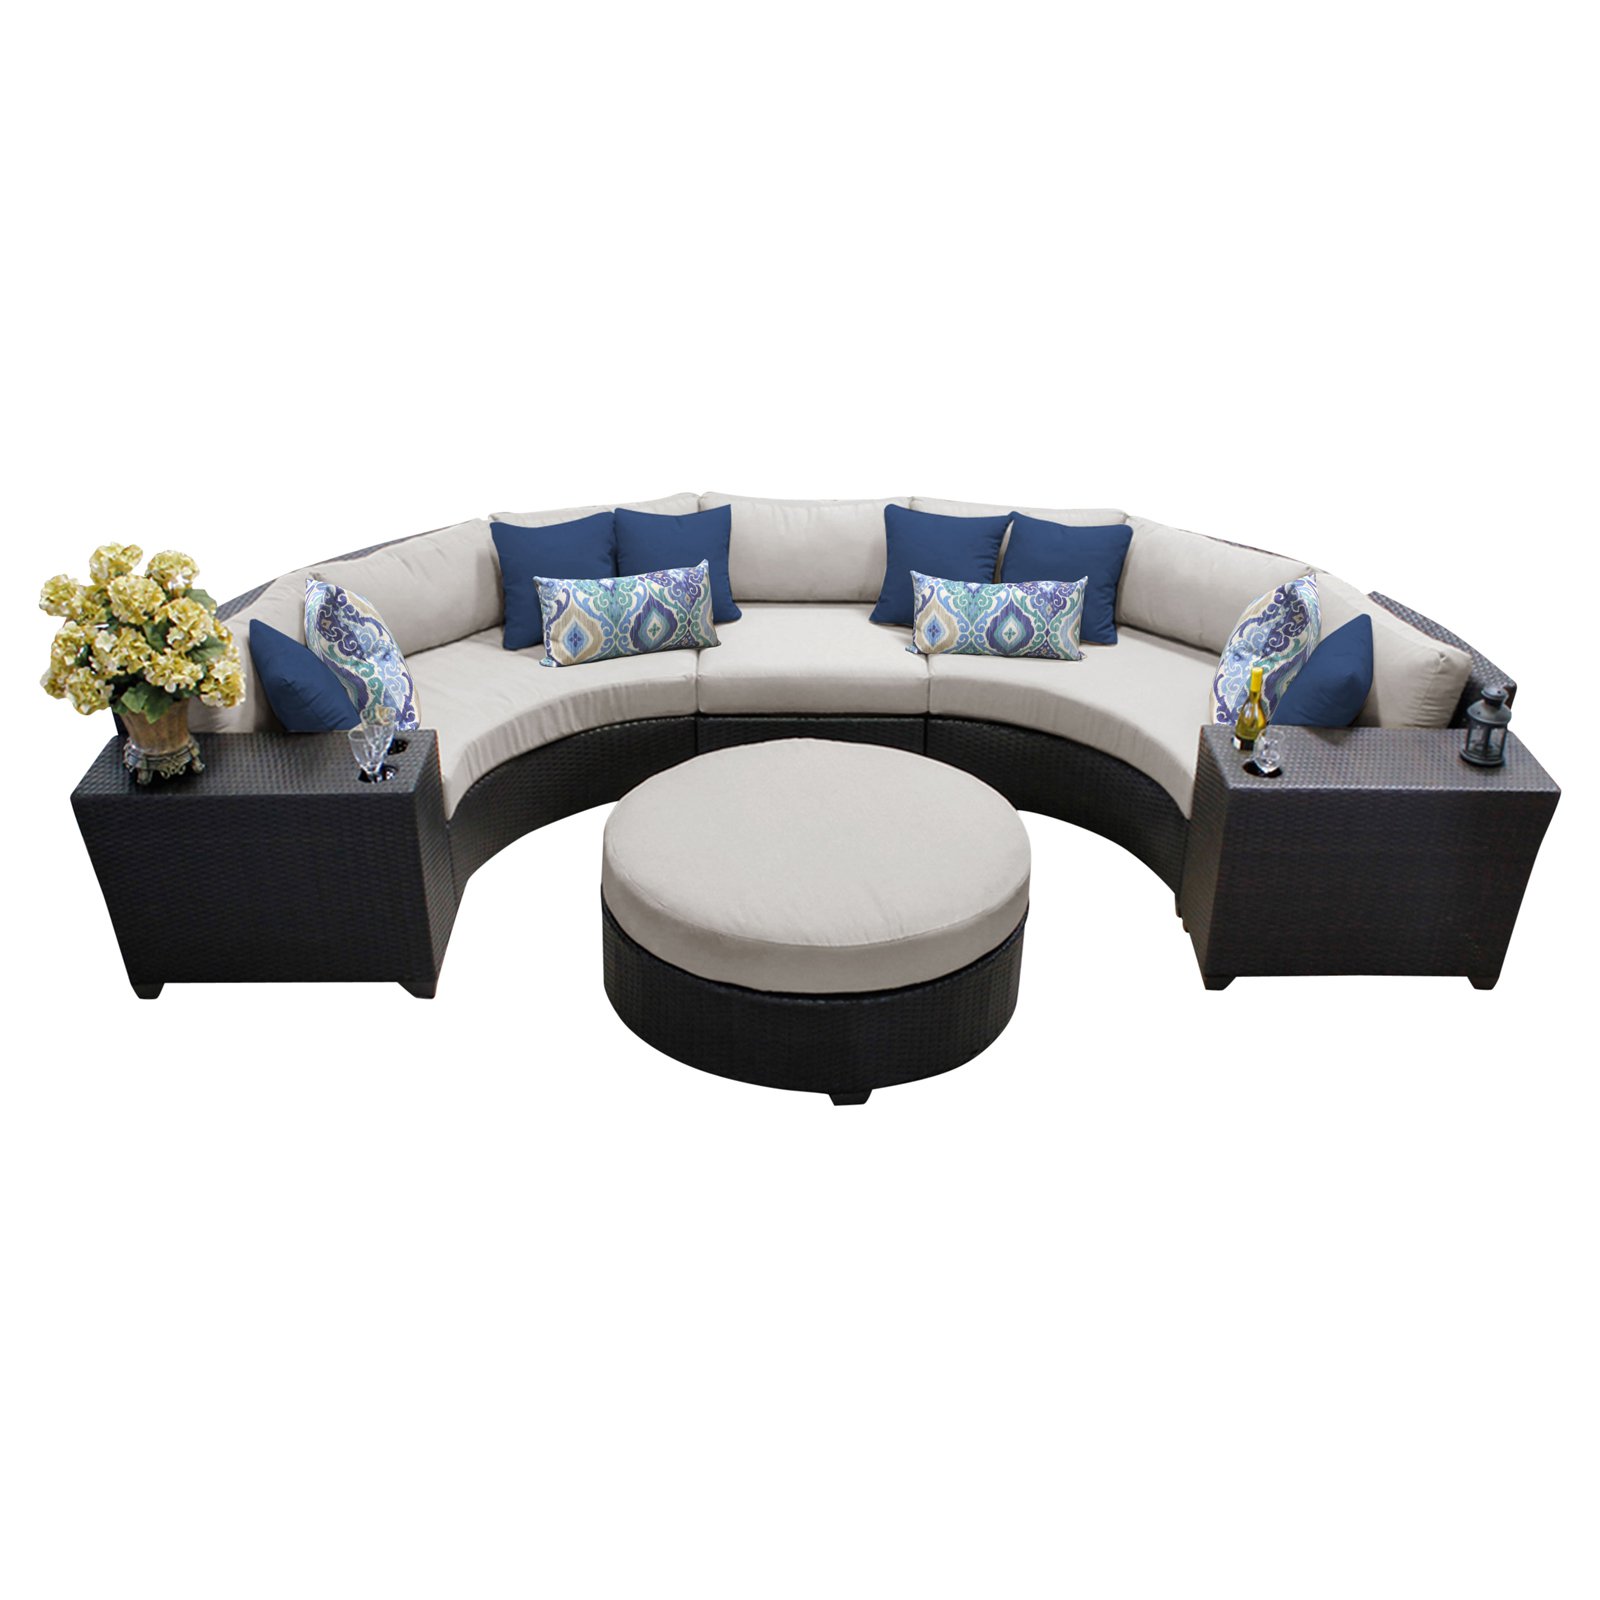 TK Classics Barbados Wicker 6 Piece Patio Conversation Set with Round Coffee Table and 2 Sets of Cushion Covers - image 1 of 2